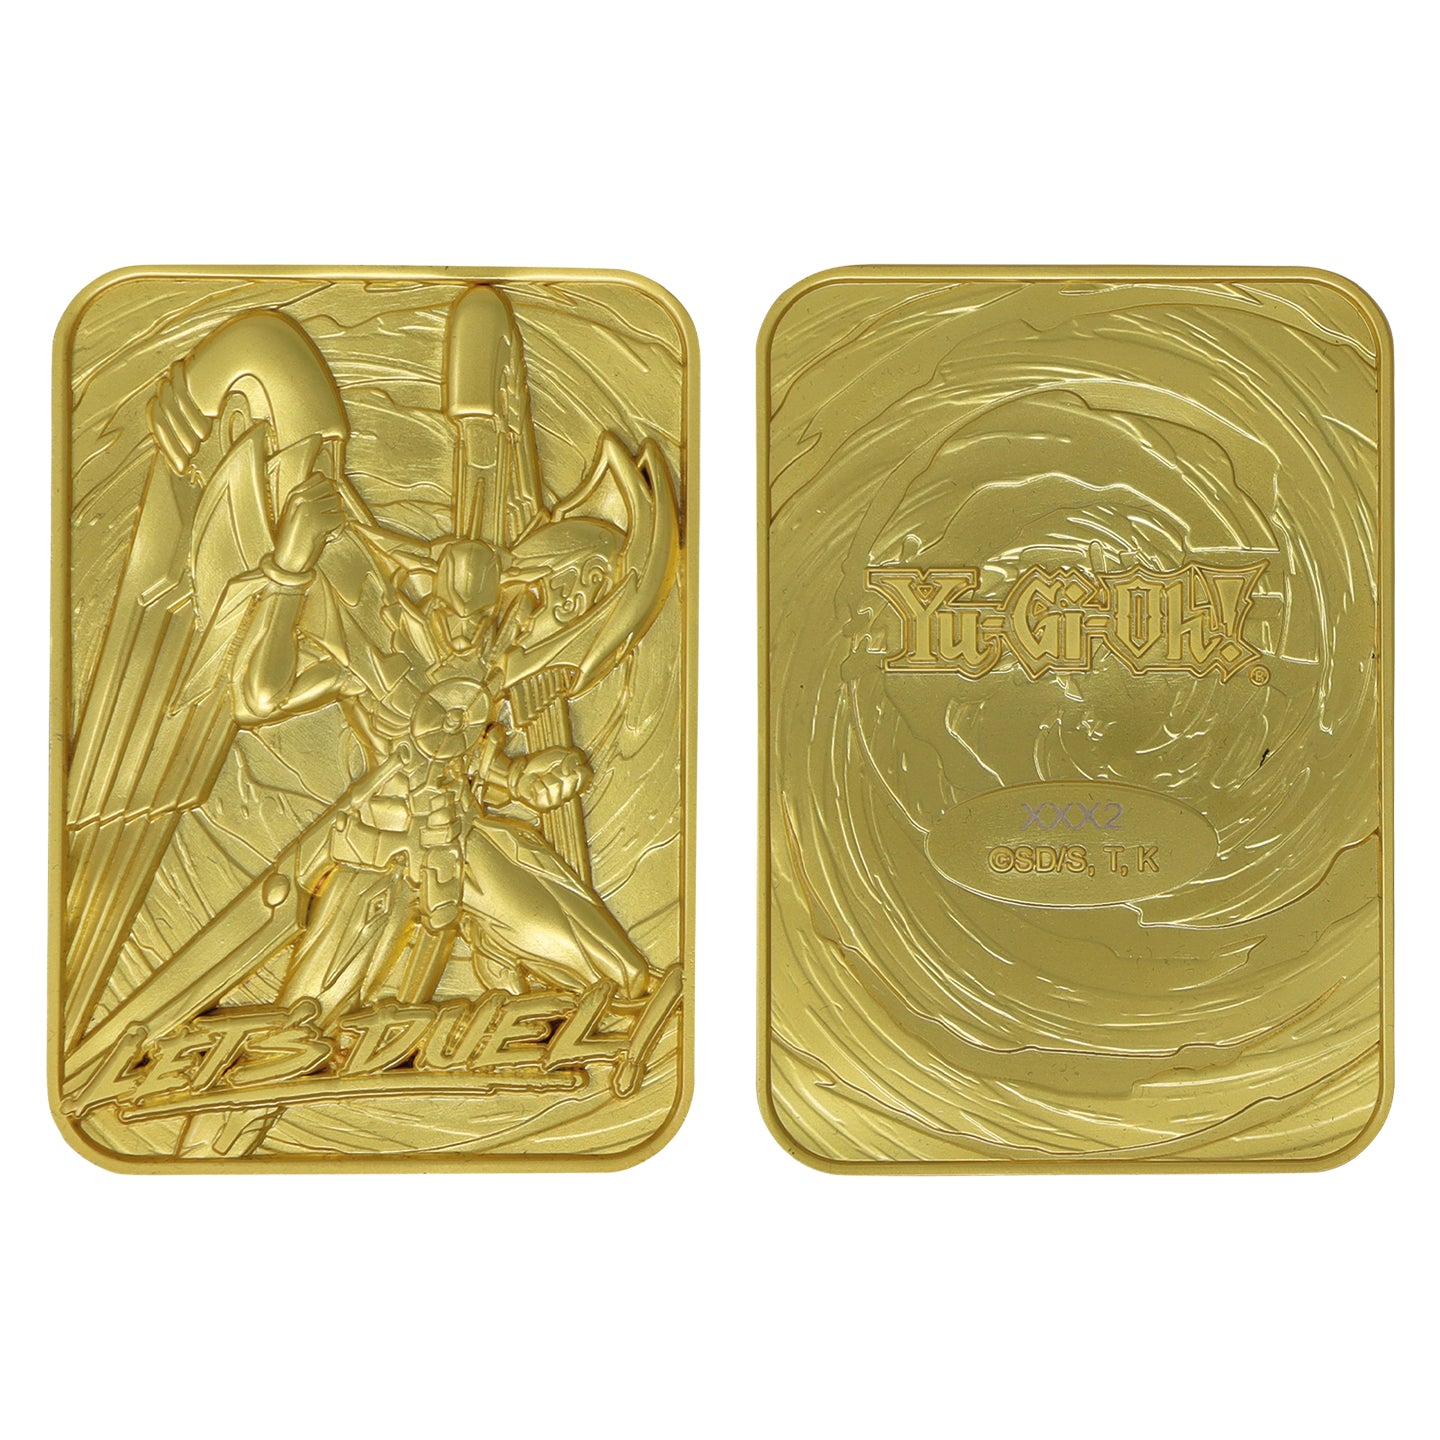 Yu-Gi-Oh! Limited Edition 24k Gold Plated Number 39: Utopia Metal Card